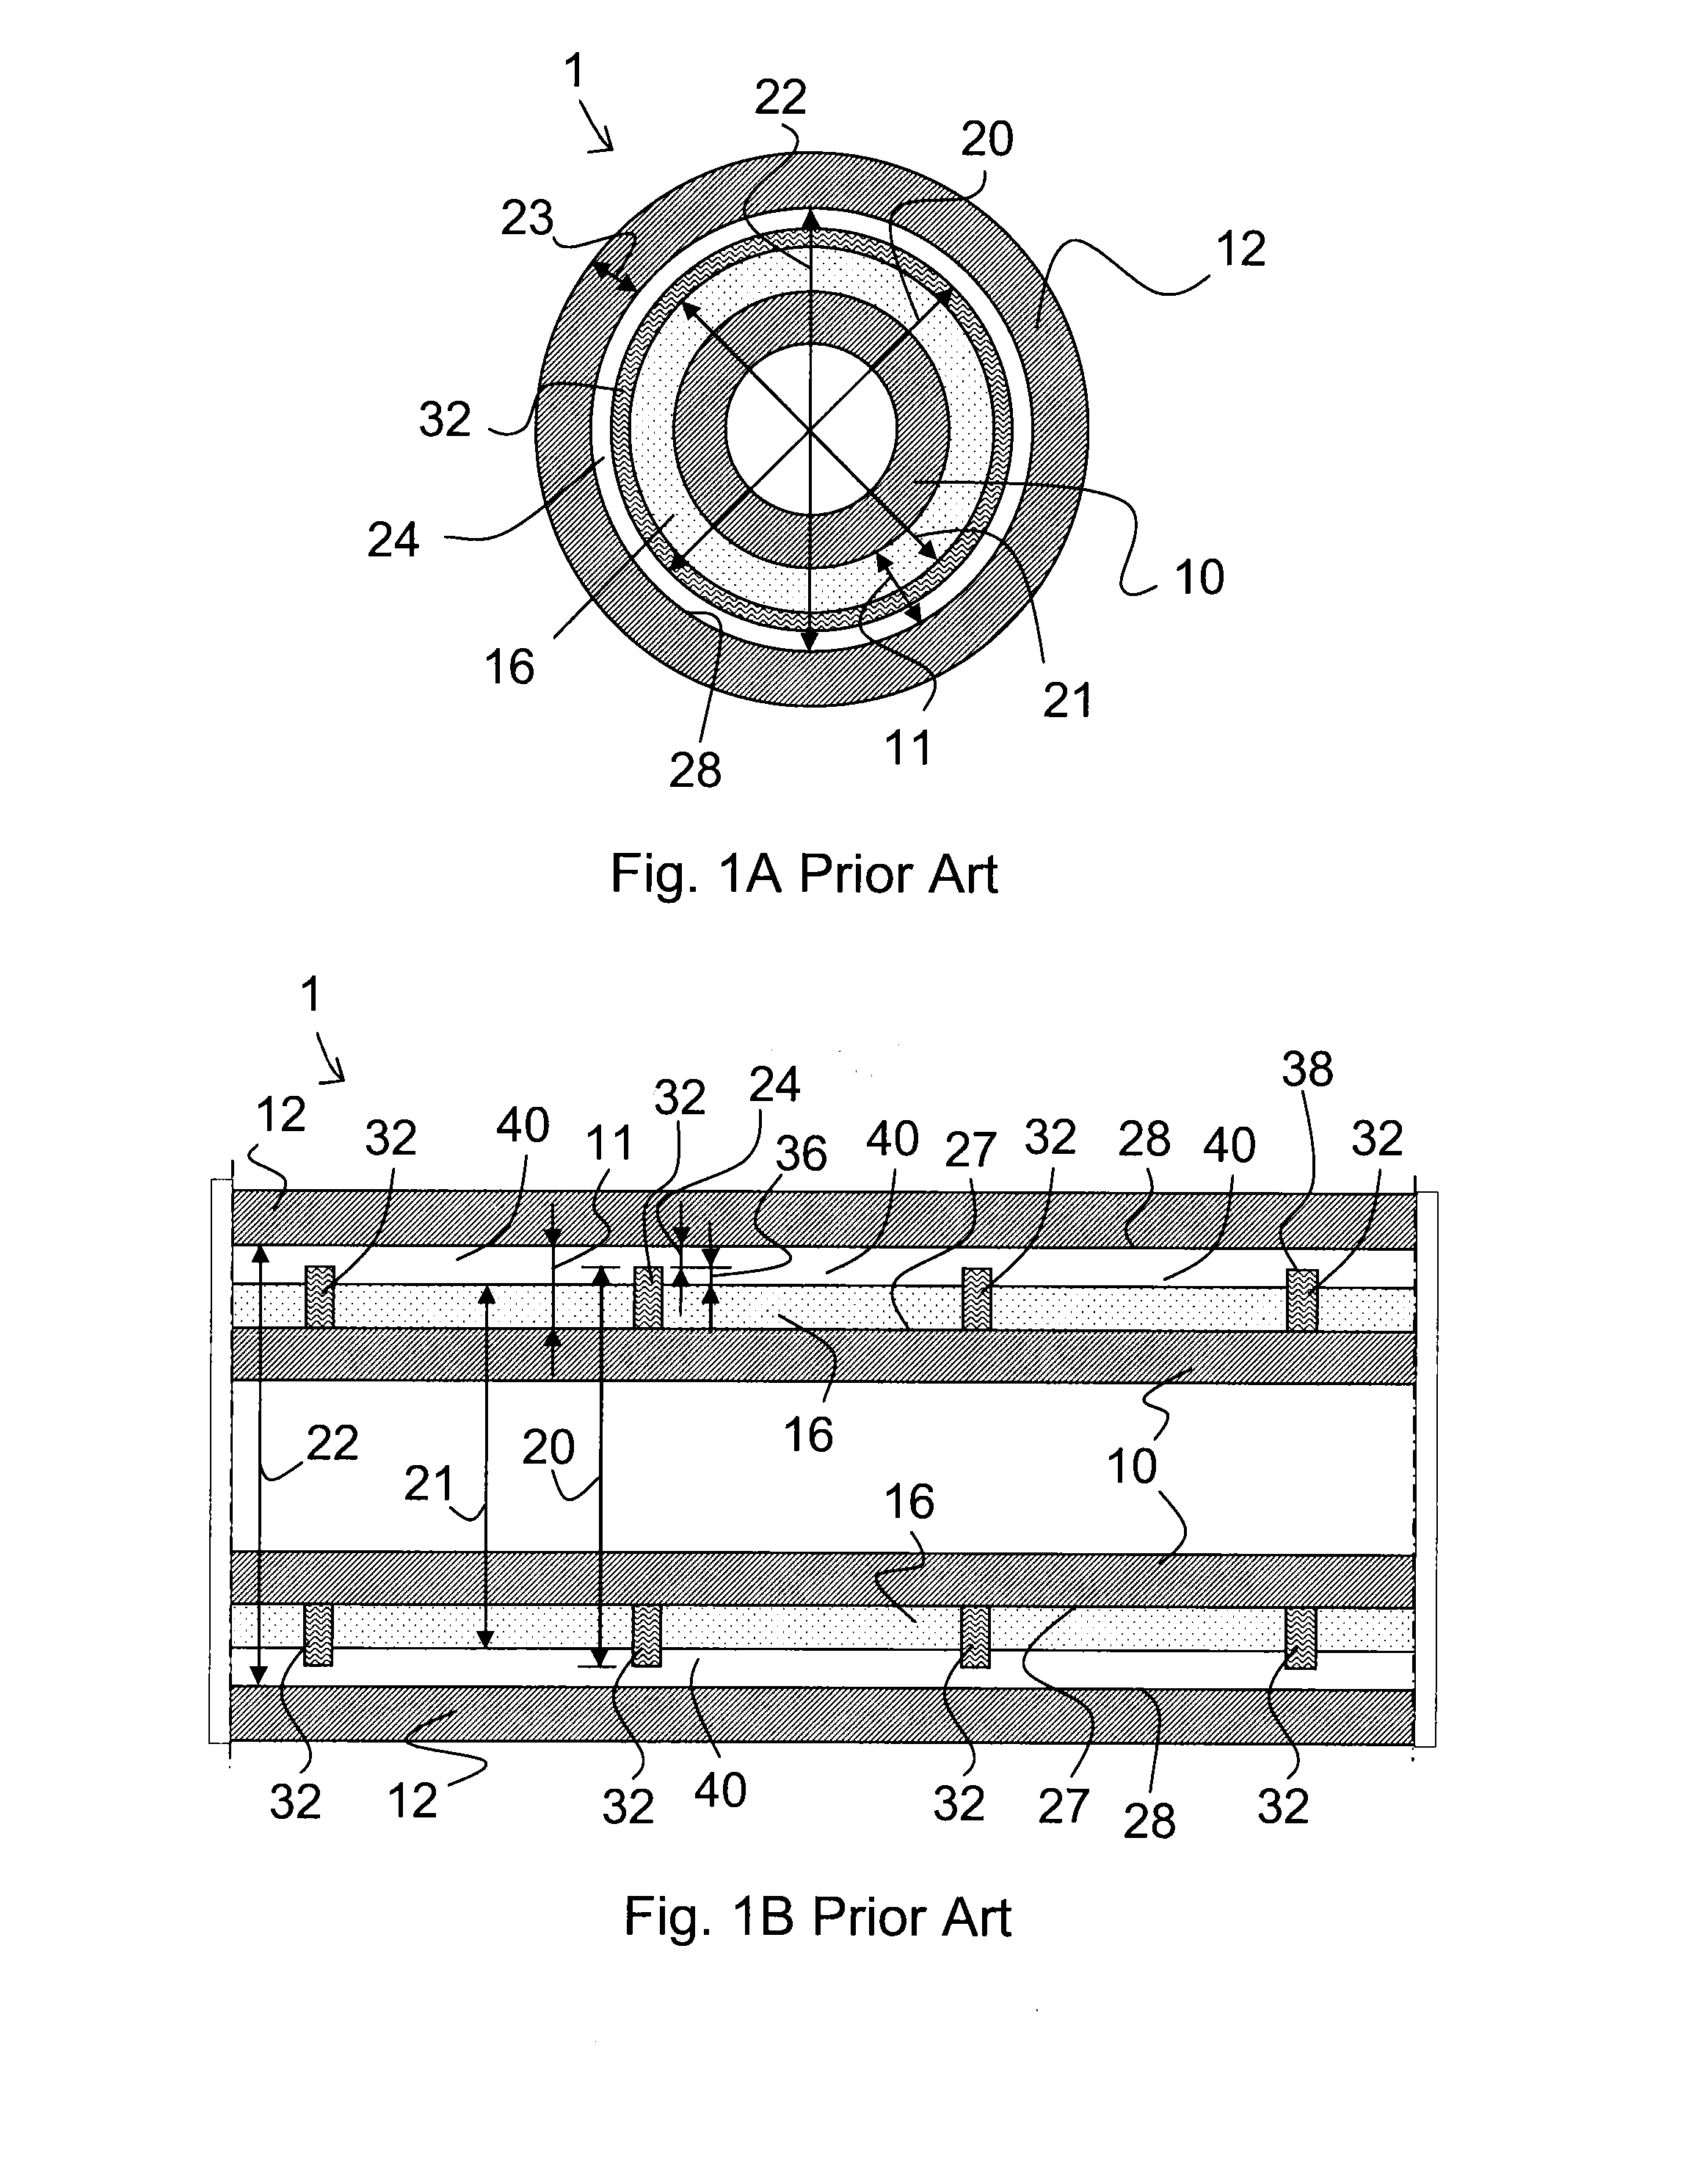 Insulation for pipe-in-pipe systems